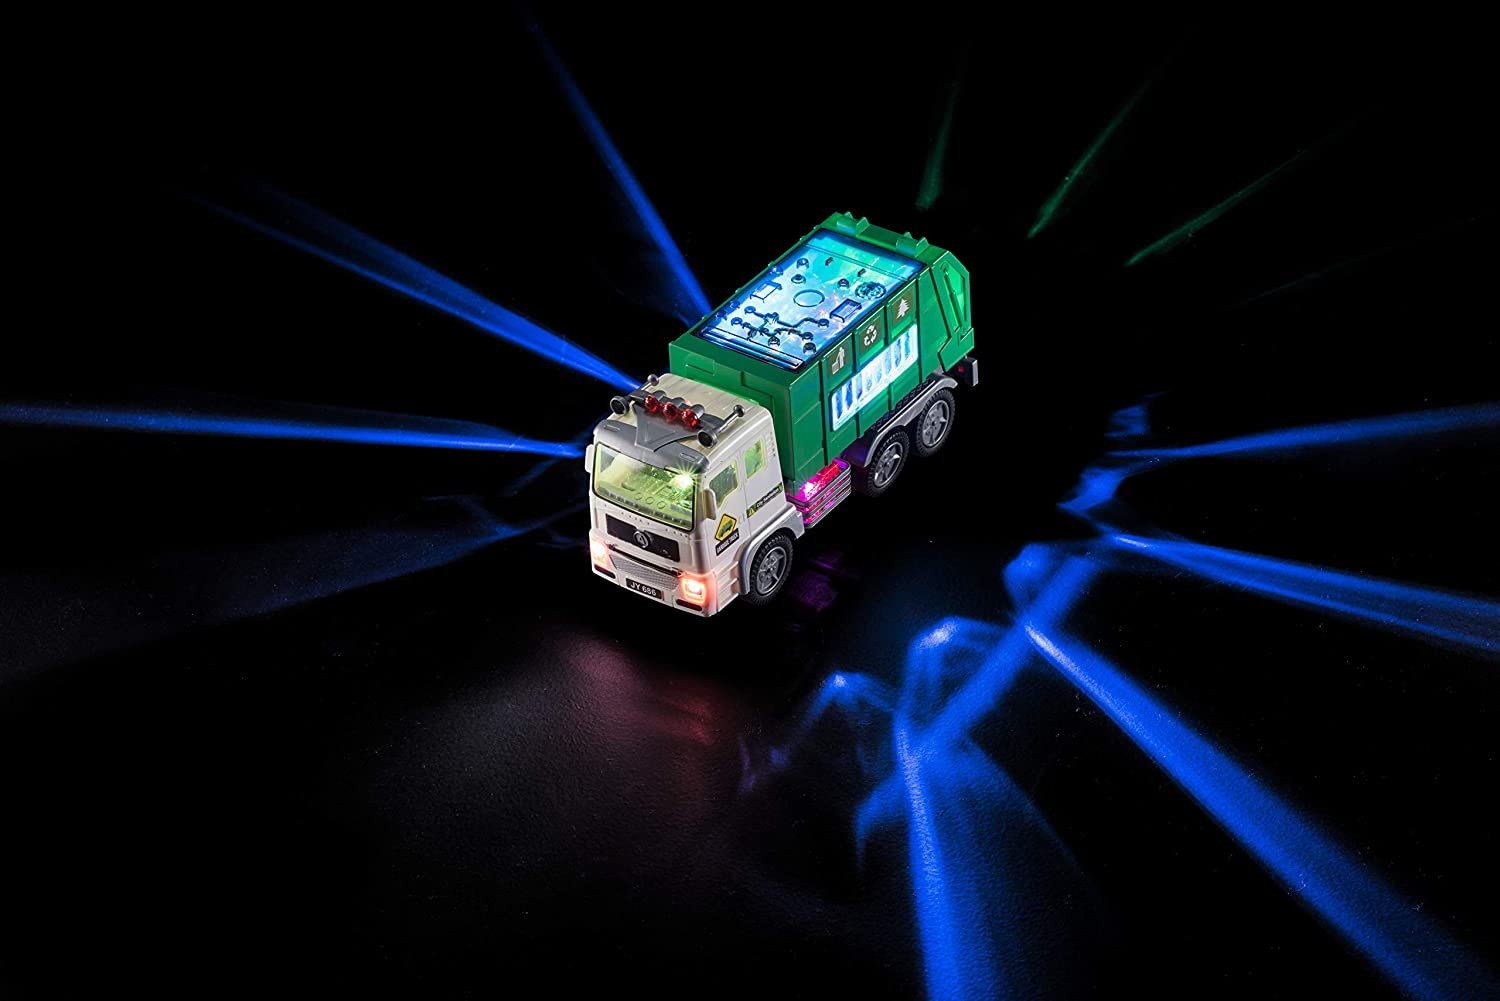 Toy Garbage Truck for Kids with 4D Lights and Sounds - Battery Operated Automatic Bump & Go Car - Sanitation Truck Stickers